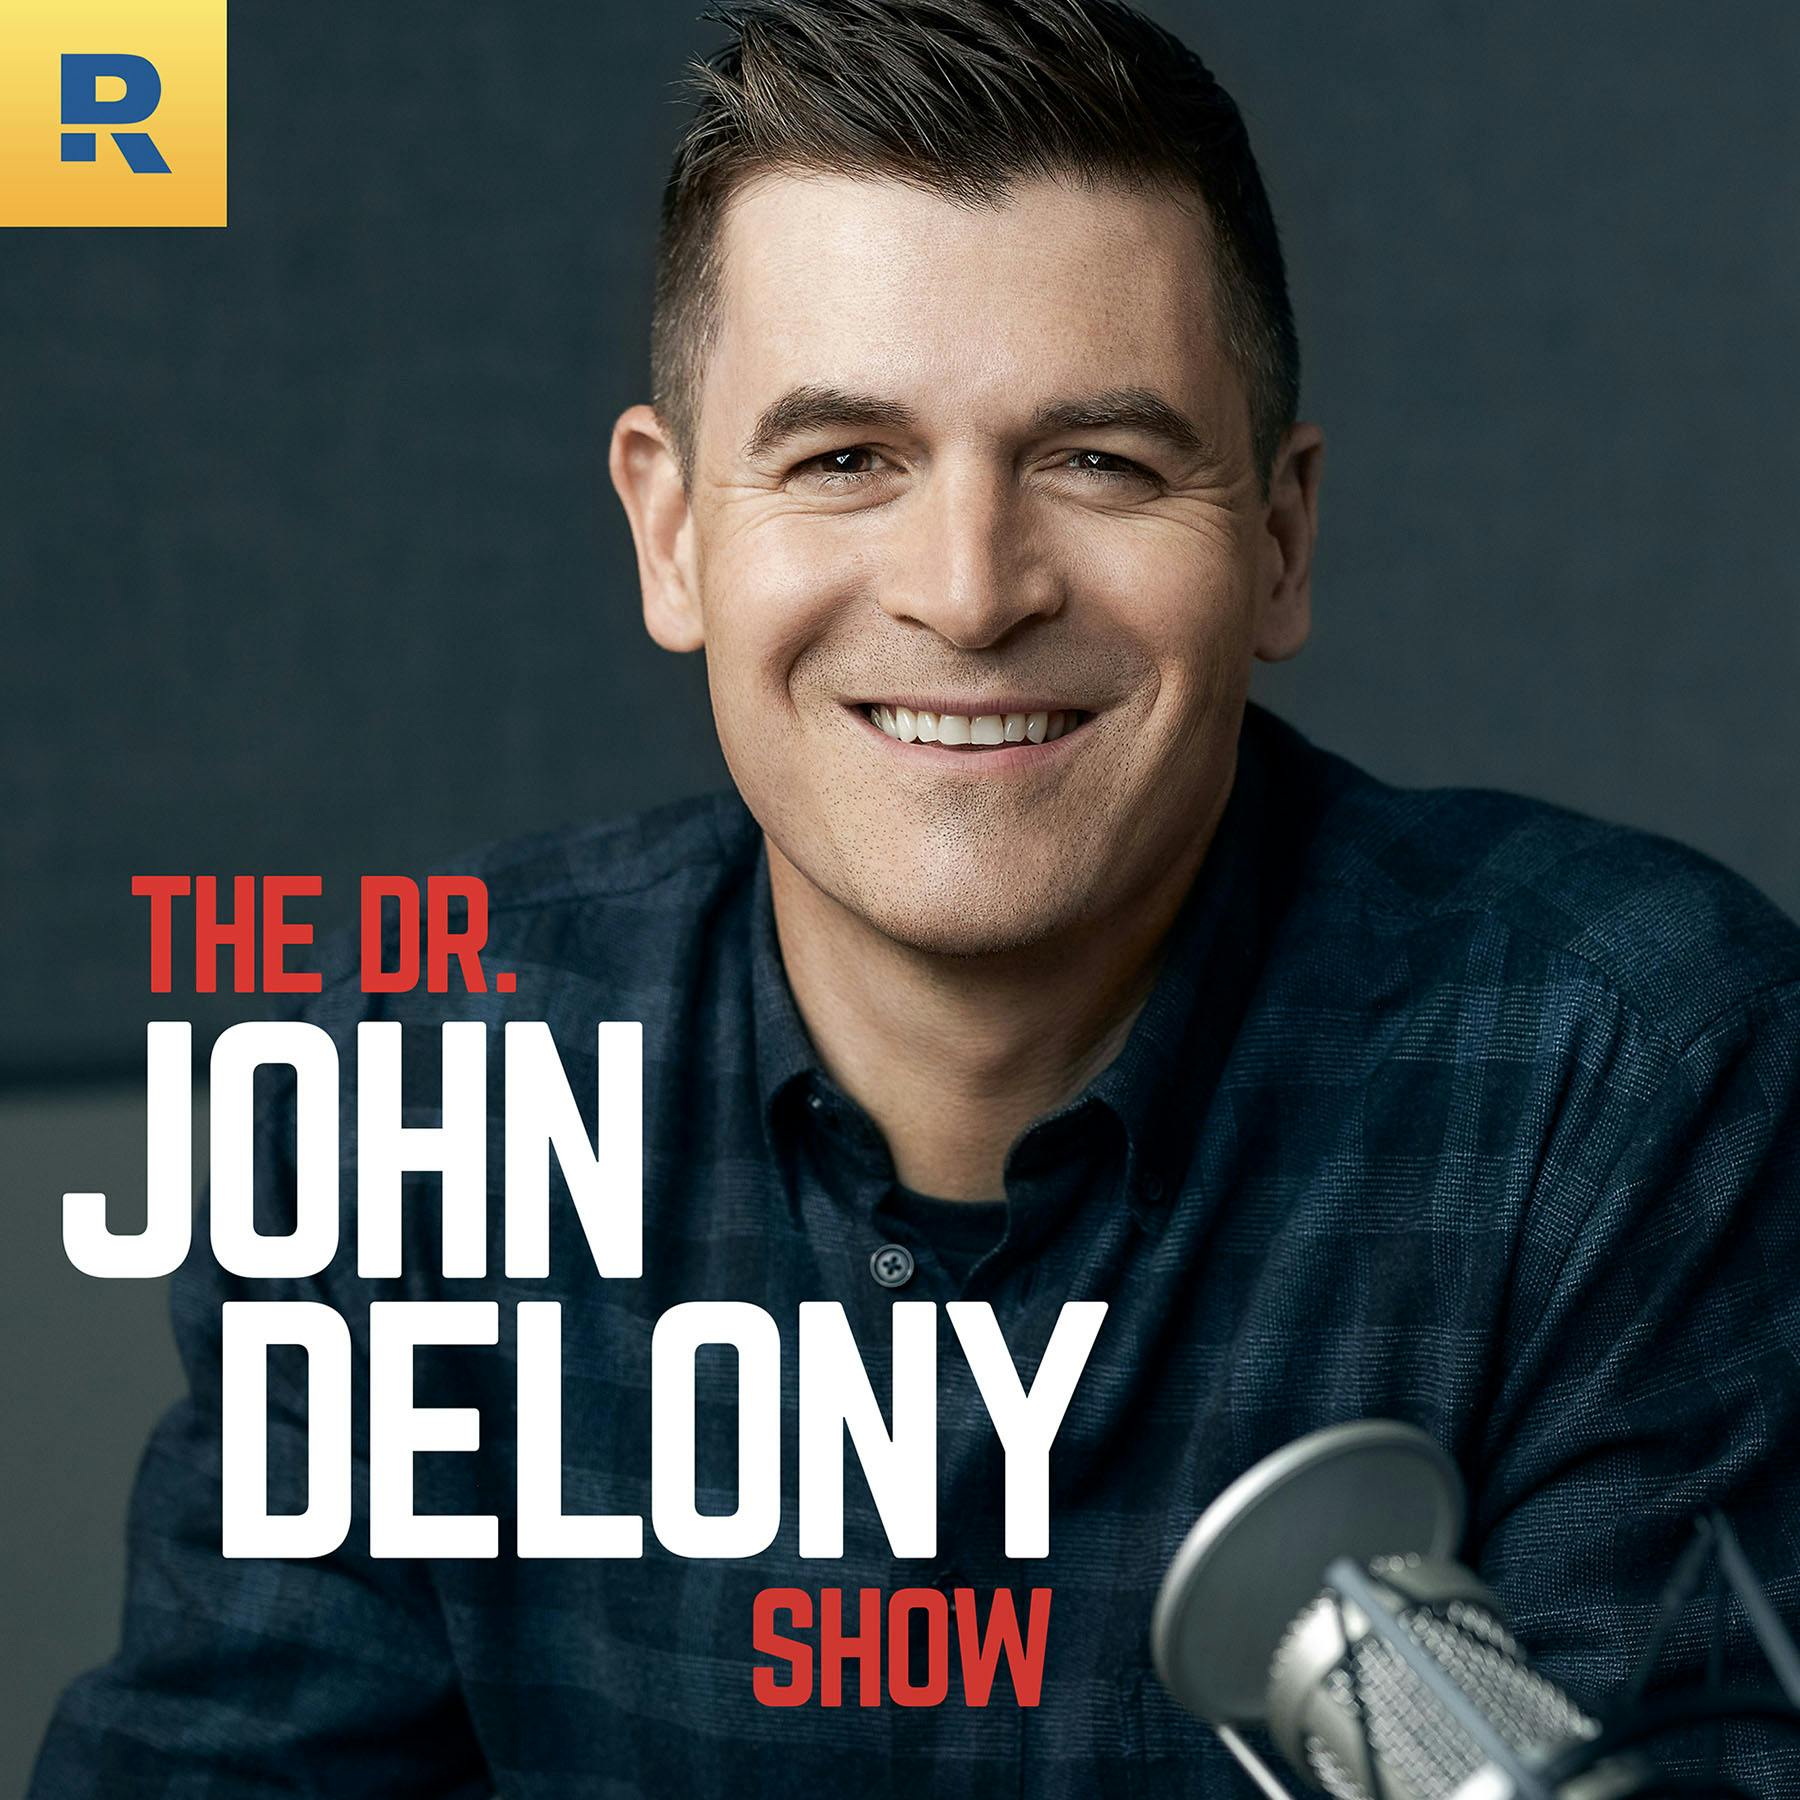 The Dr. John Delony Show:Eric Cieslewicz